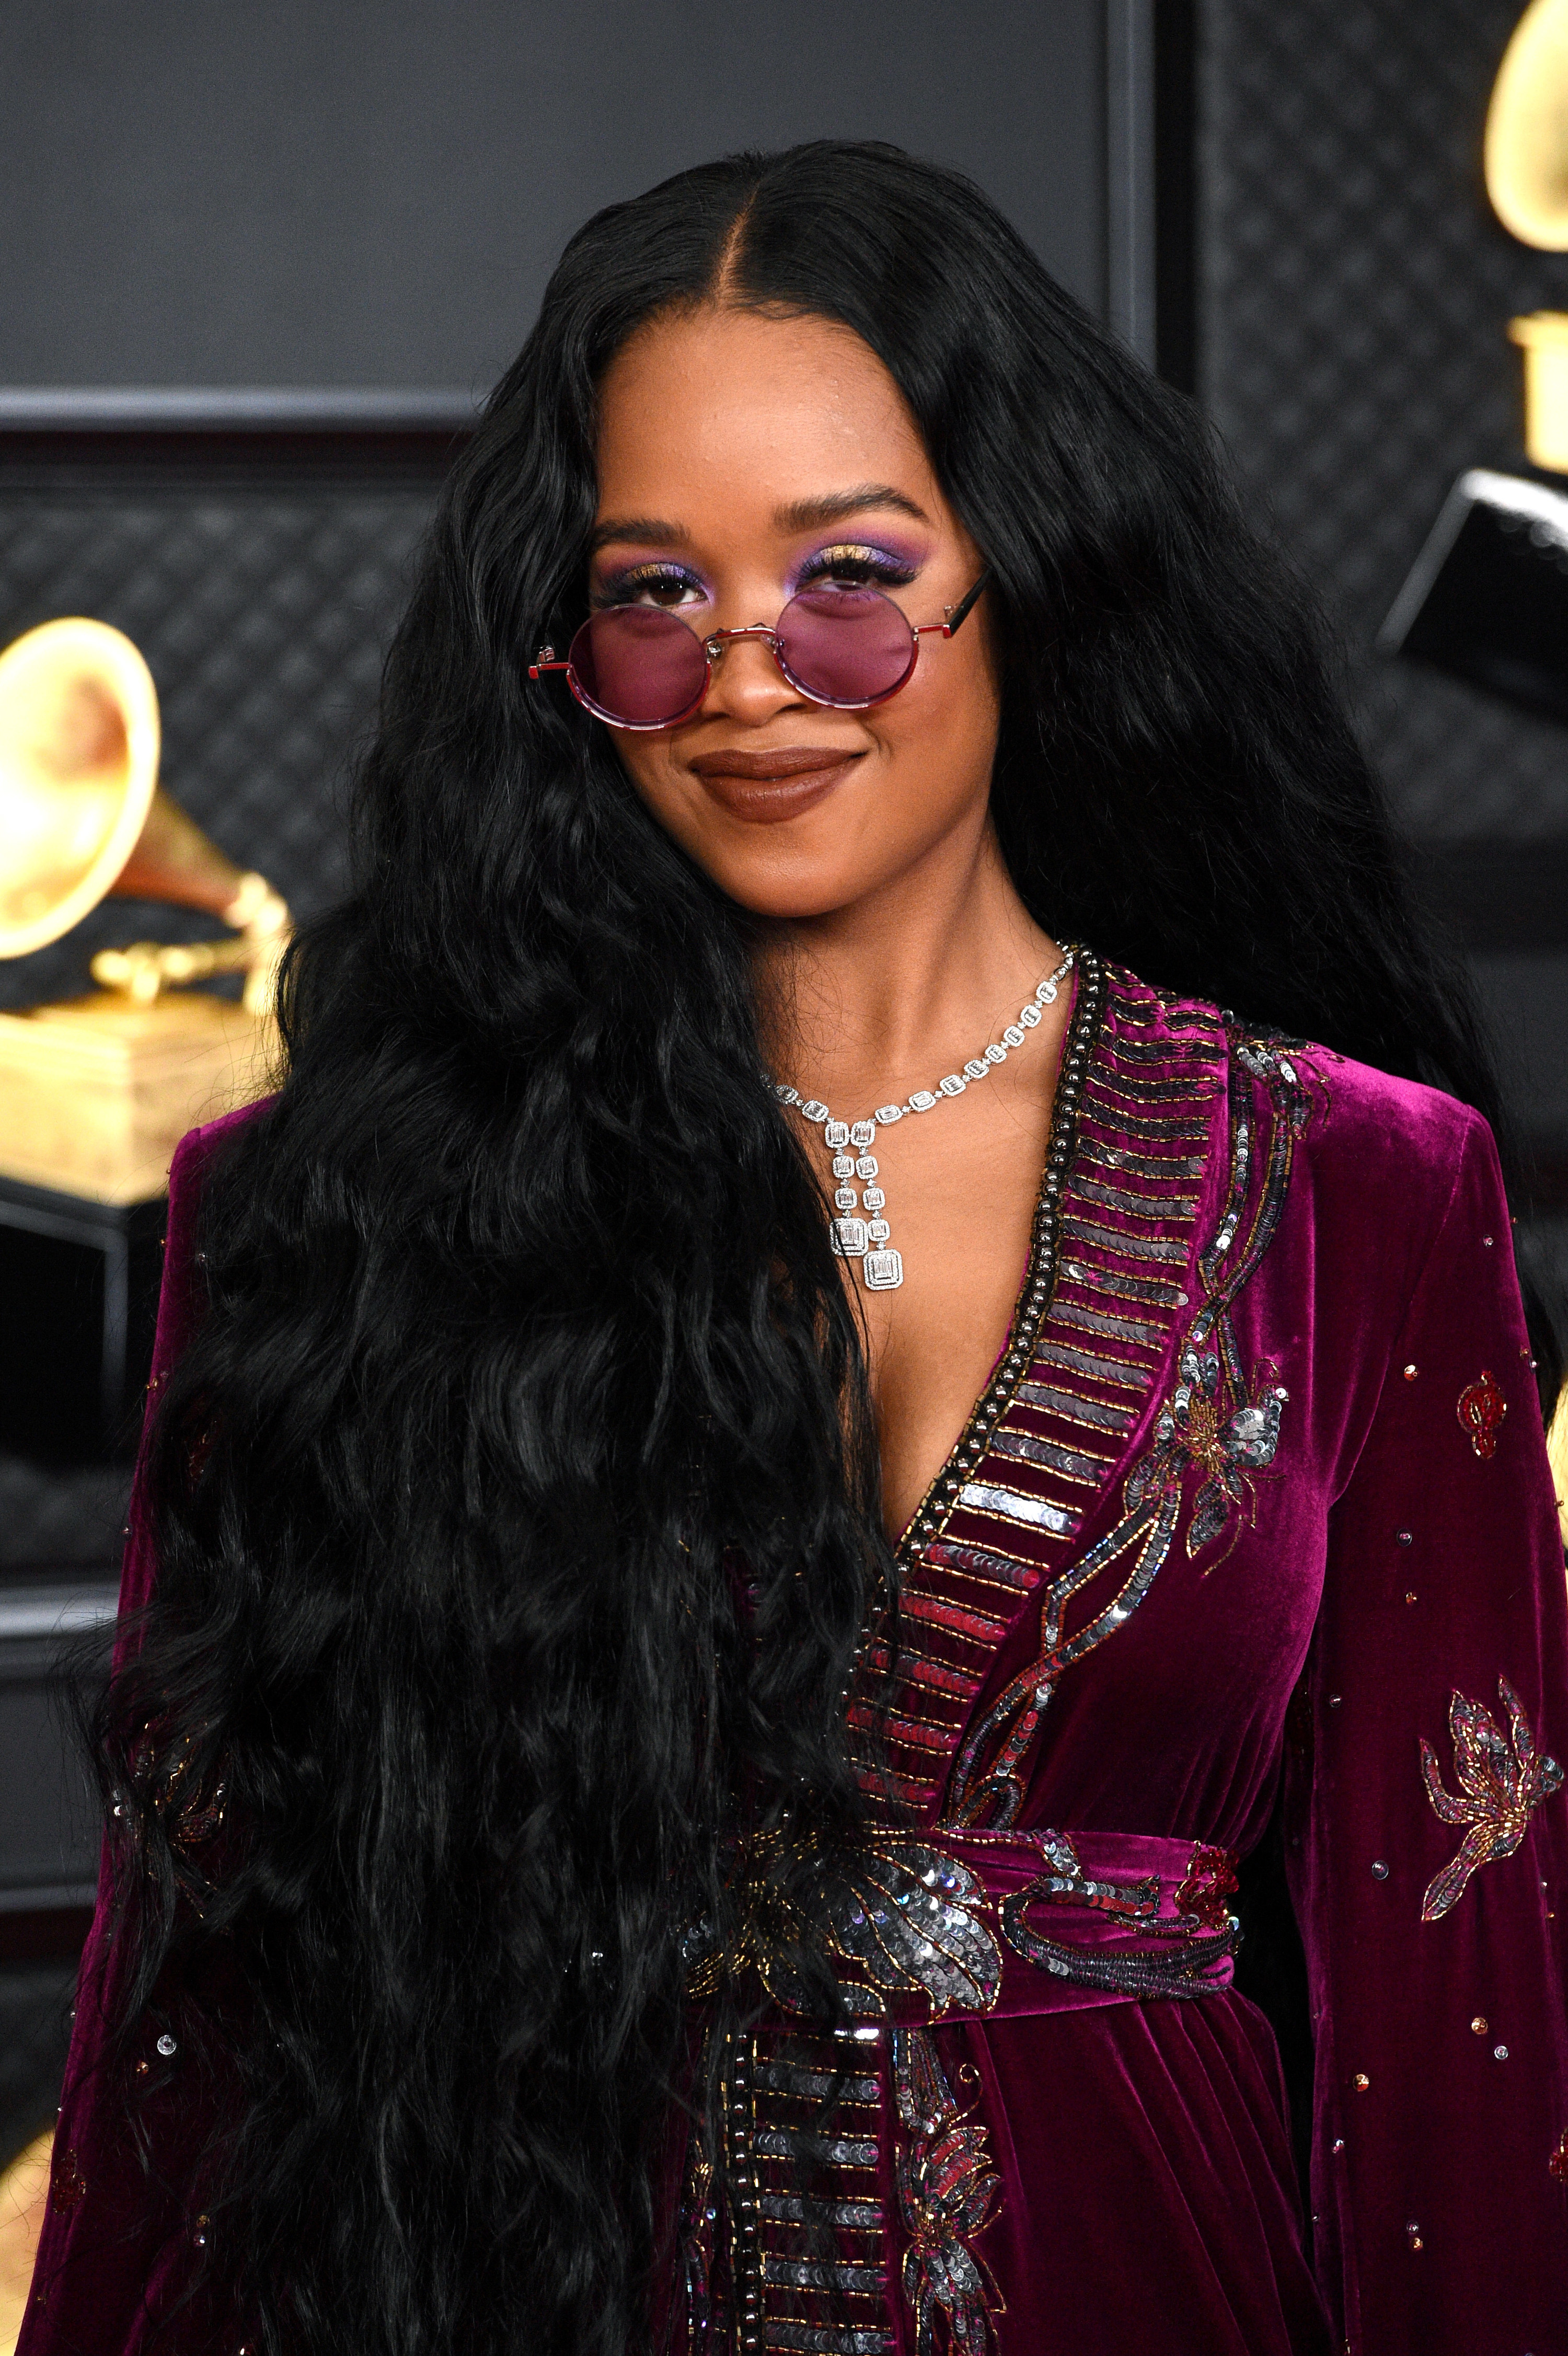 H.E.R. in a burgundy velvet dress with matching eyeshadow, wearing her hair in long loose waves